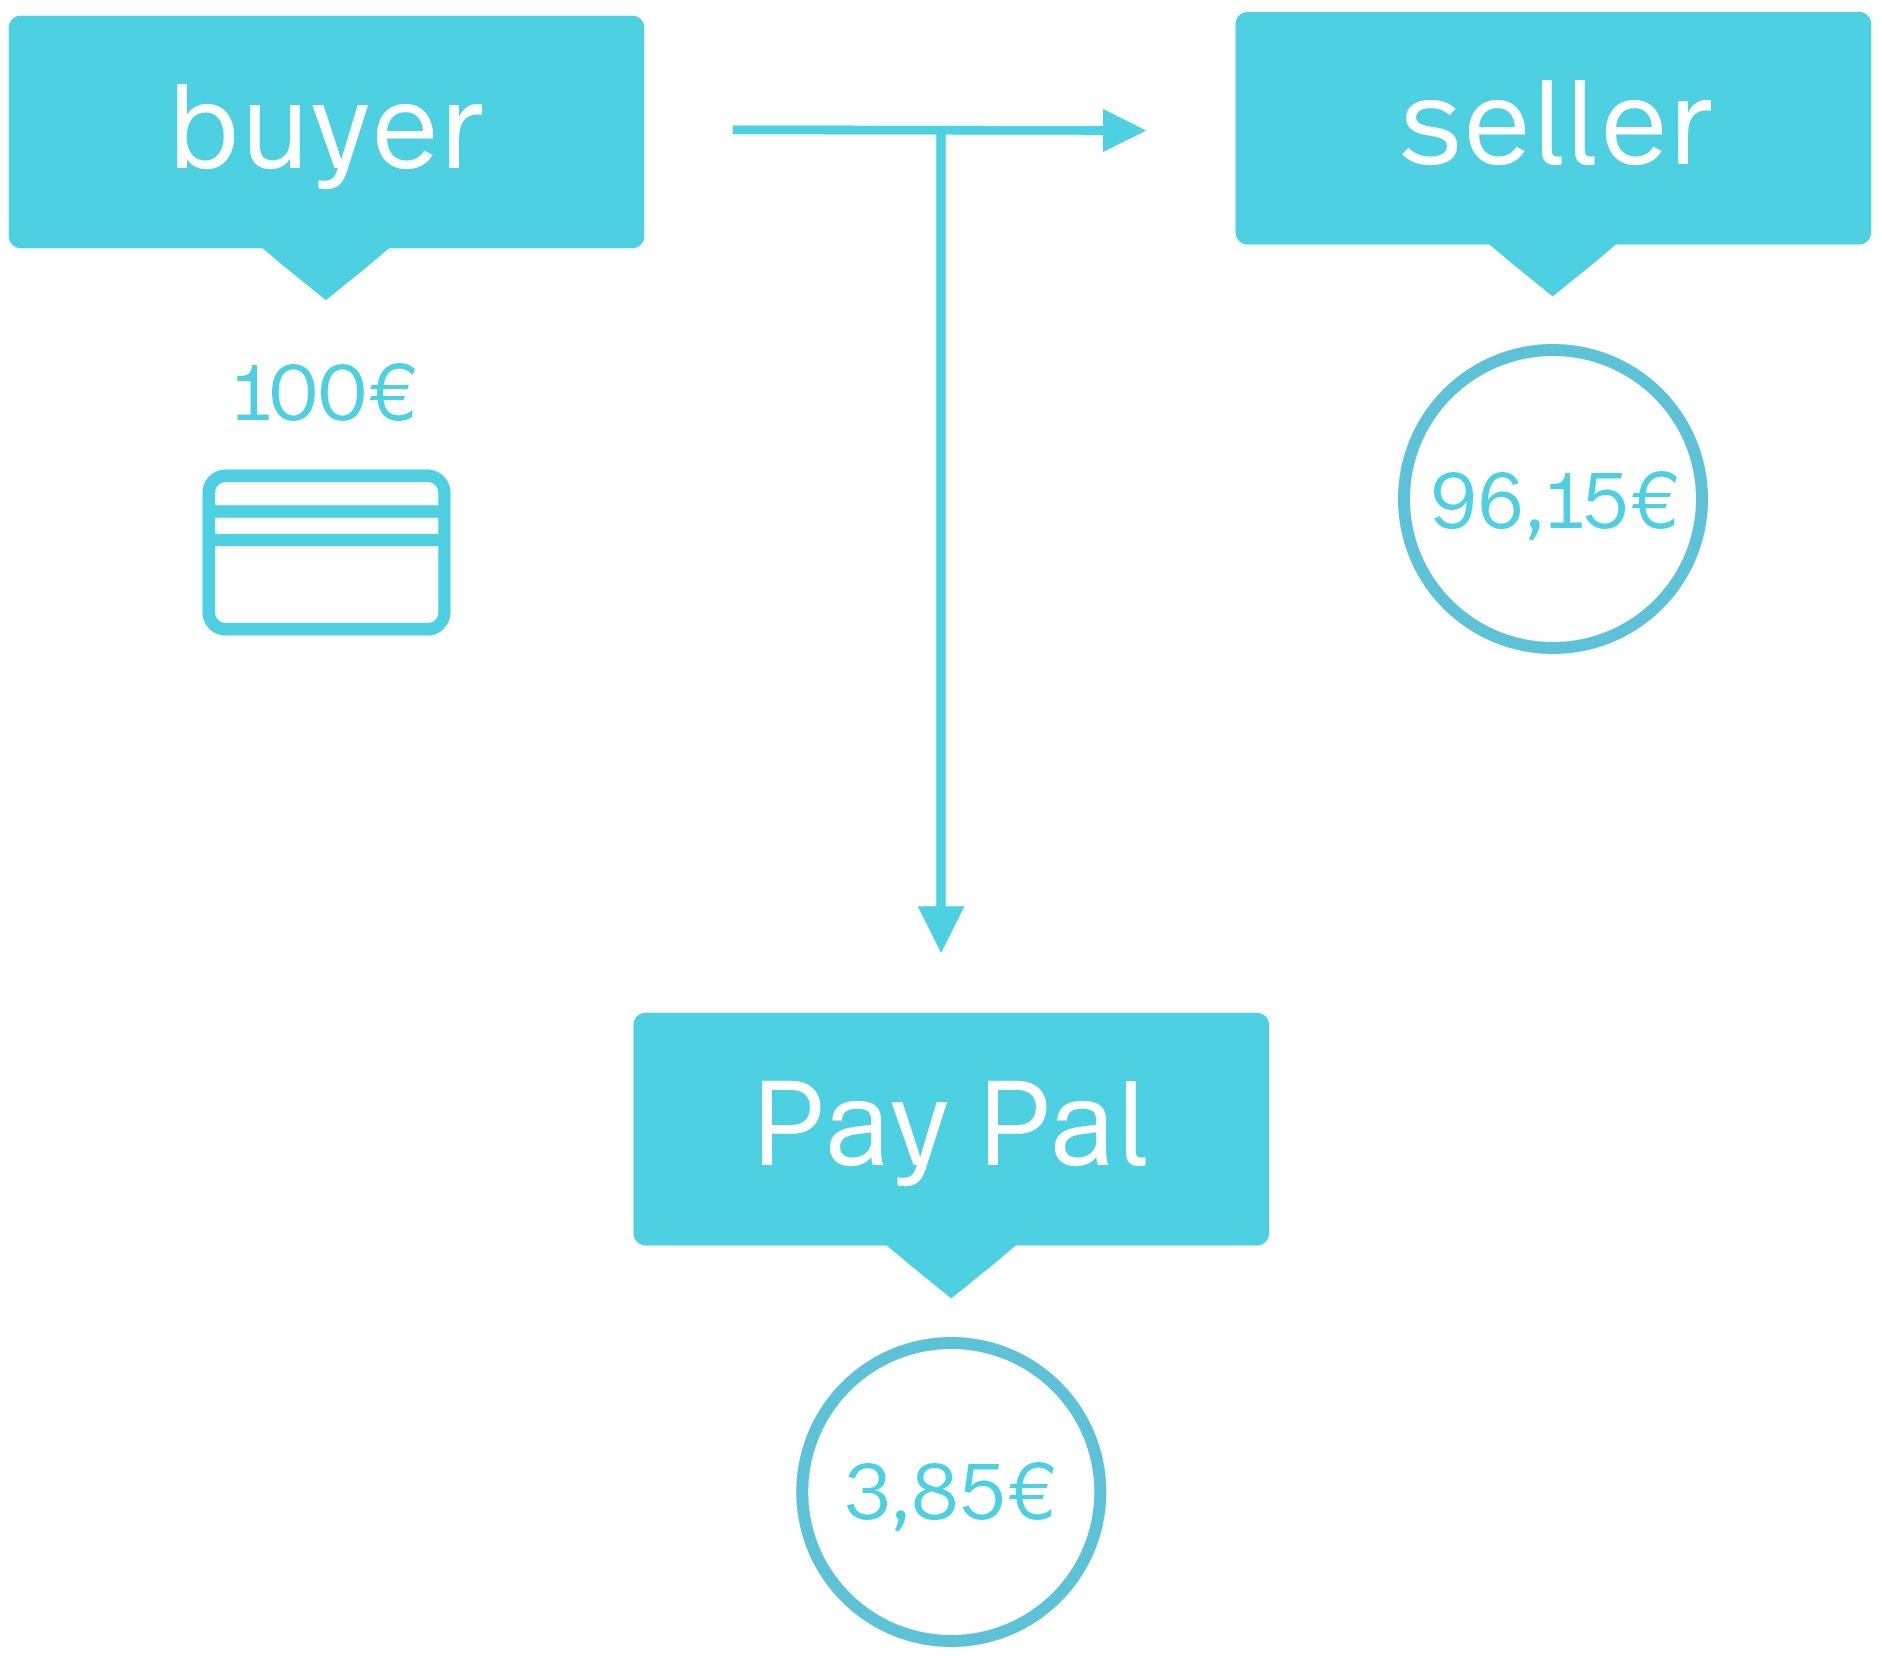 A graphic that shows the commission for a PayPal transaction: If a customer pays 100 euros, the seller receives 96.15 euros of this. 3.85 euros go to PayPal as a fee.